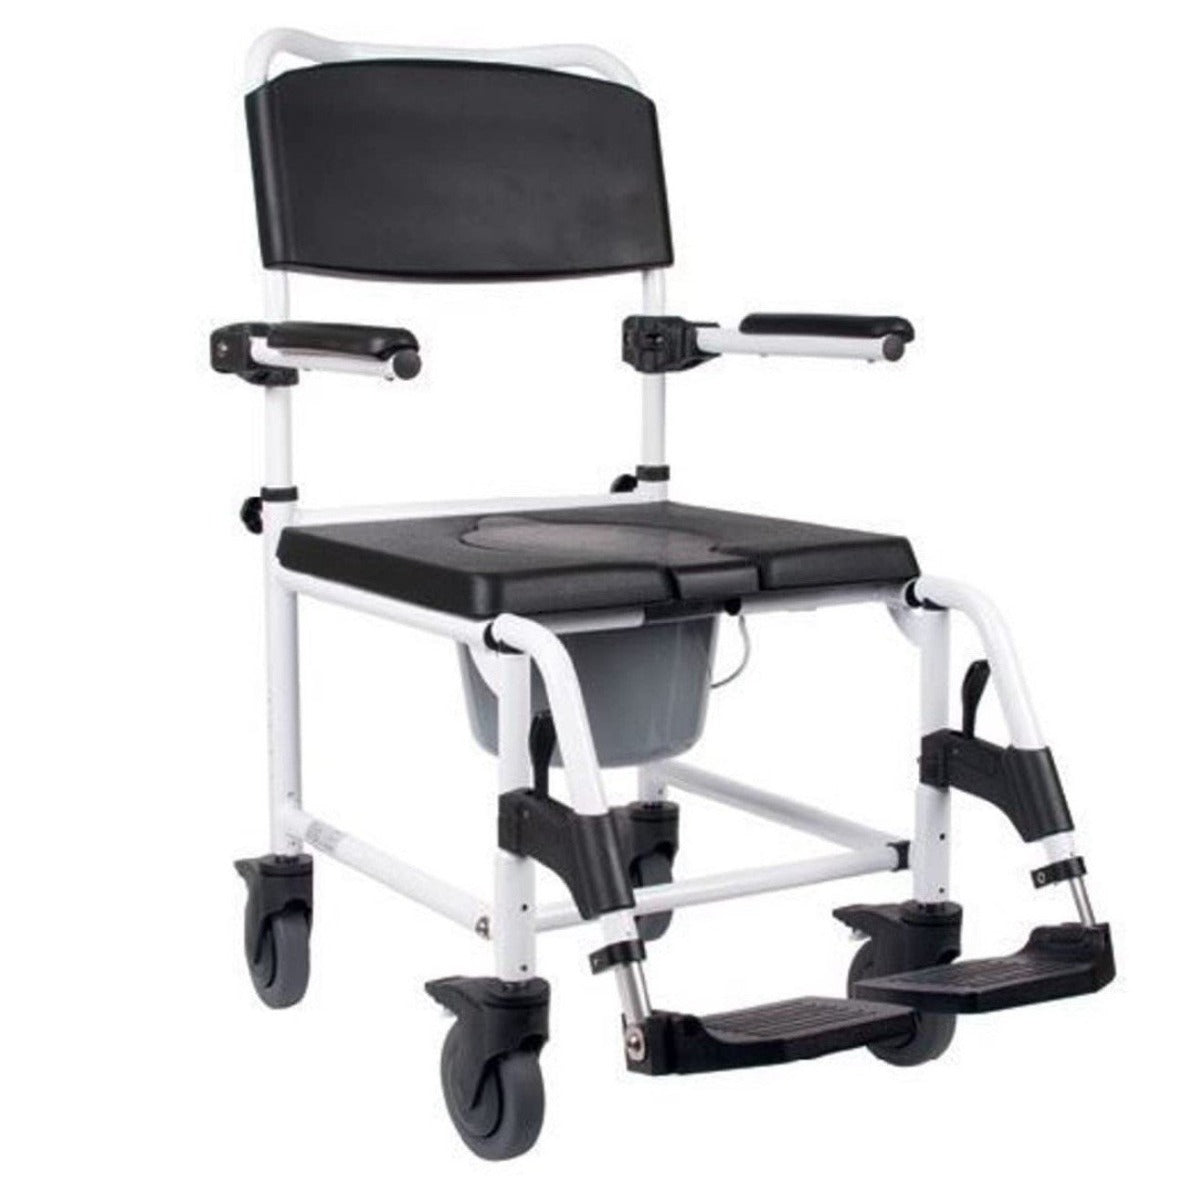 COMMODE AND SHOWER CHAIR with 4 LOCKABLE 5 inch WHEELS